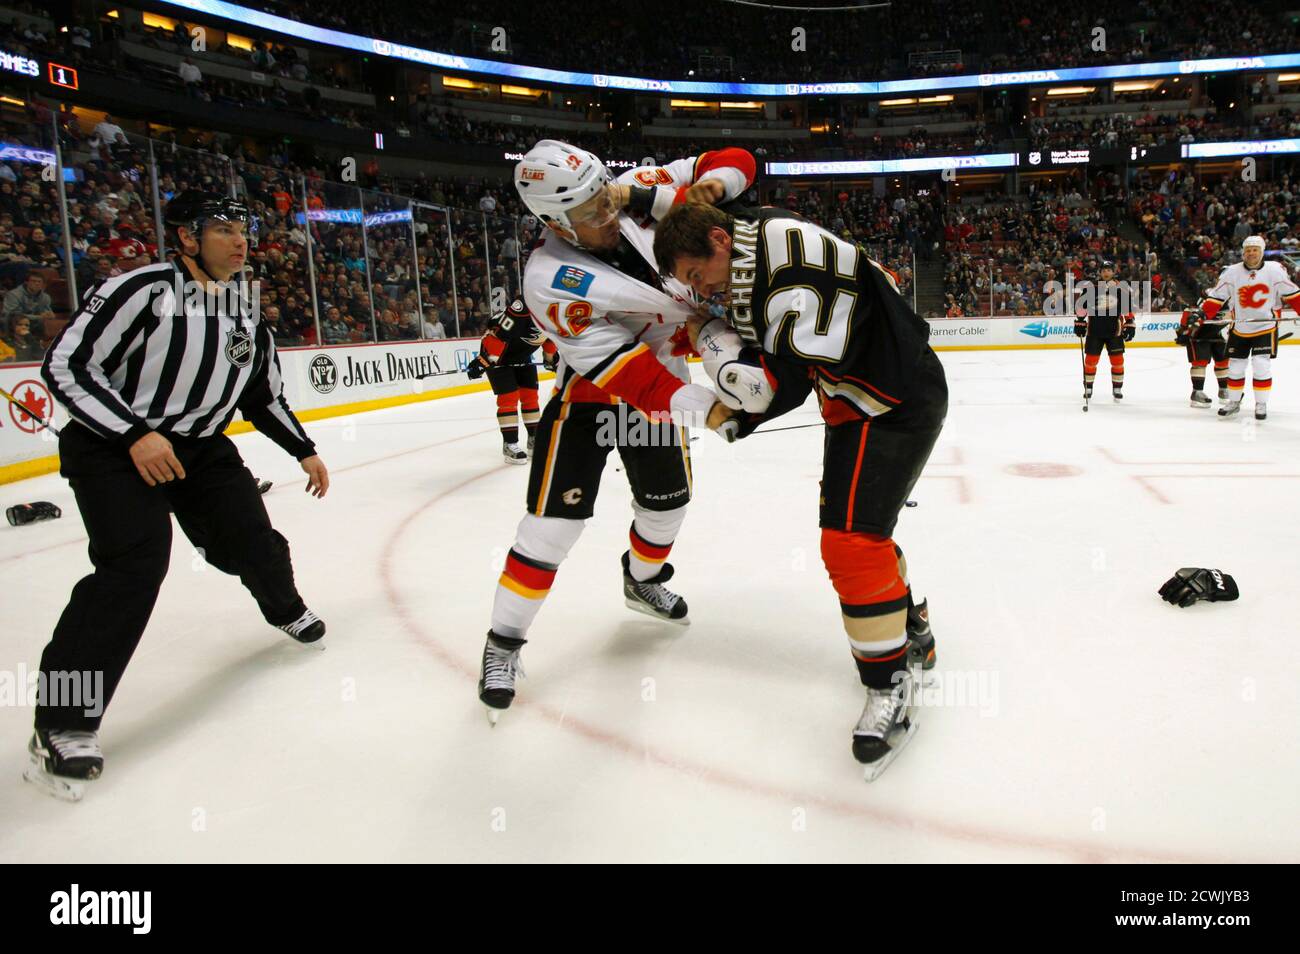 Linesman Steve Miller (L) watches as Calgary Flames right wing Jarome Iginla (12) fights Anaheim Ducks defenseman Francois Beauchemin (23) during their NHL hockey game in Anaheim, California March 2, 2012.  REUTERS/ Mike Blake (UNITED STATES - Tags: SPORT ICE HOCKEY TPX IMAGES OF THE DAY) Stock Photo